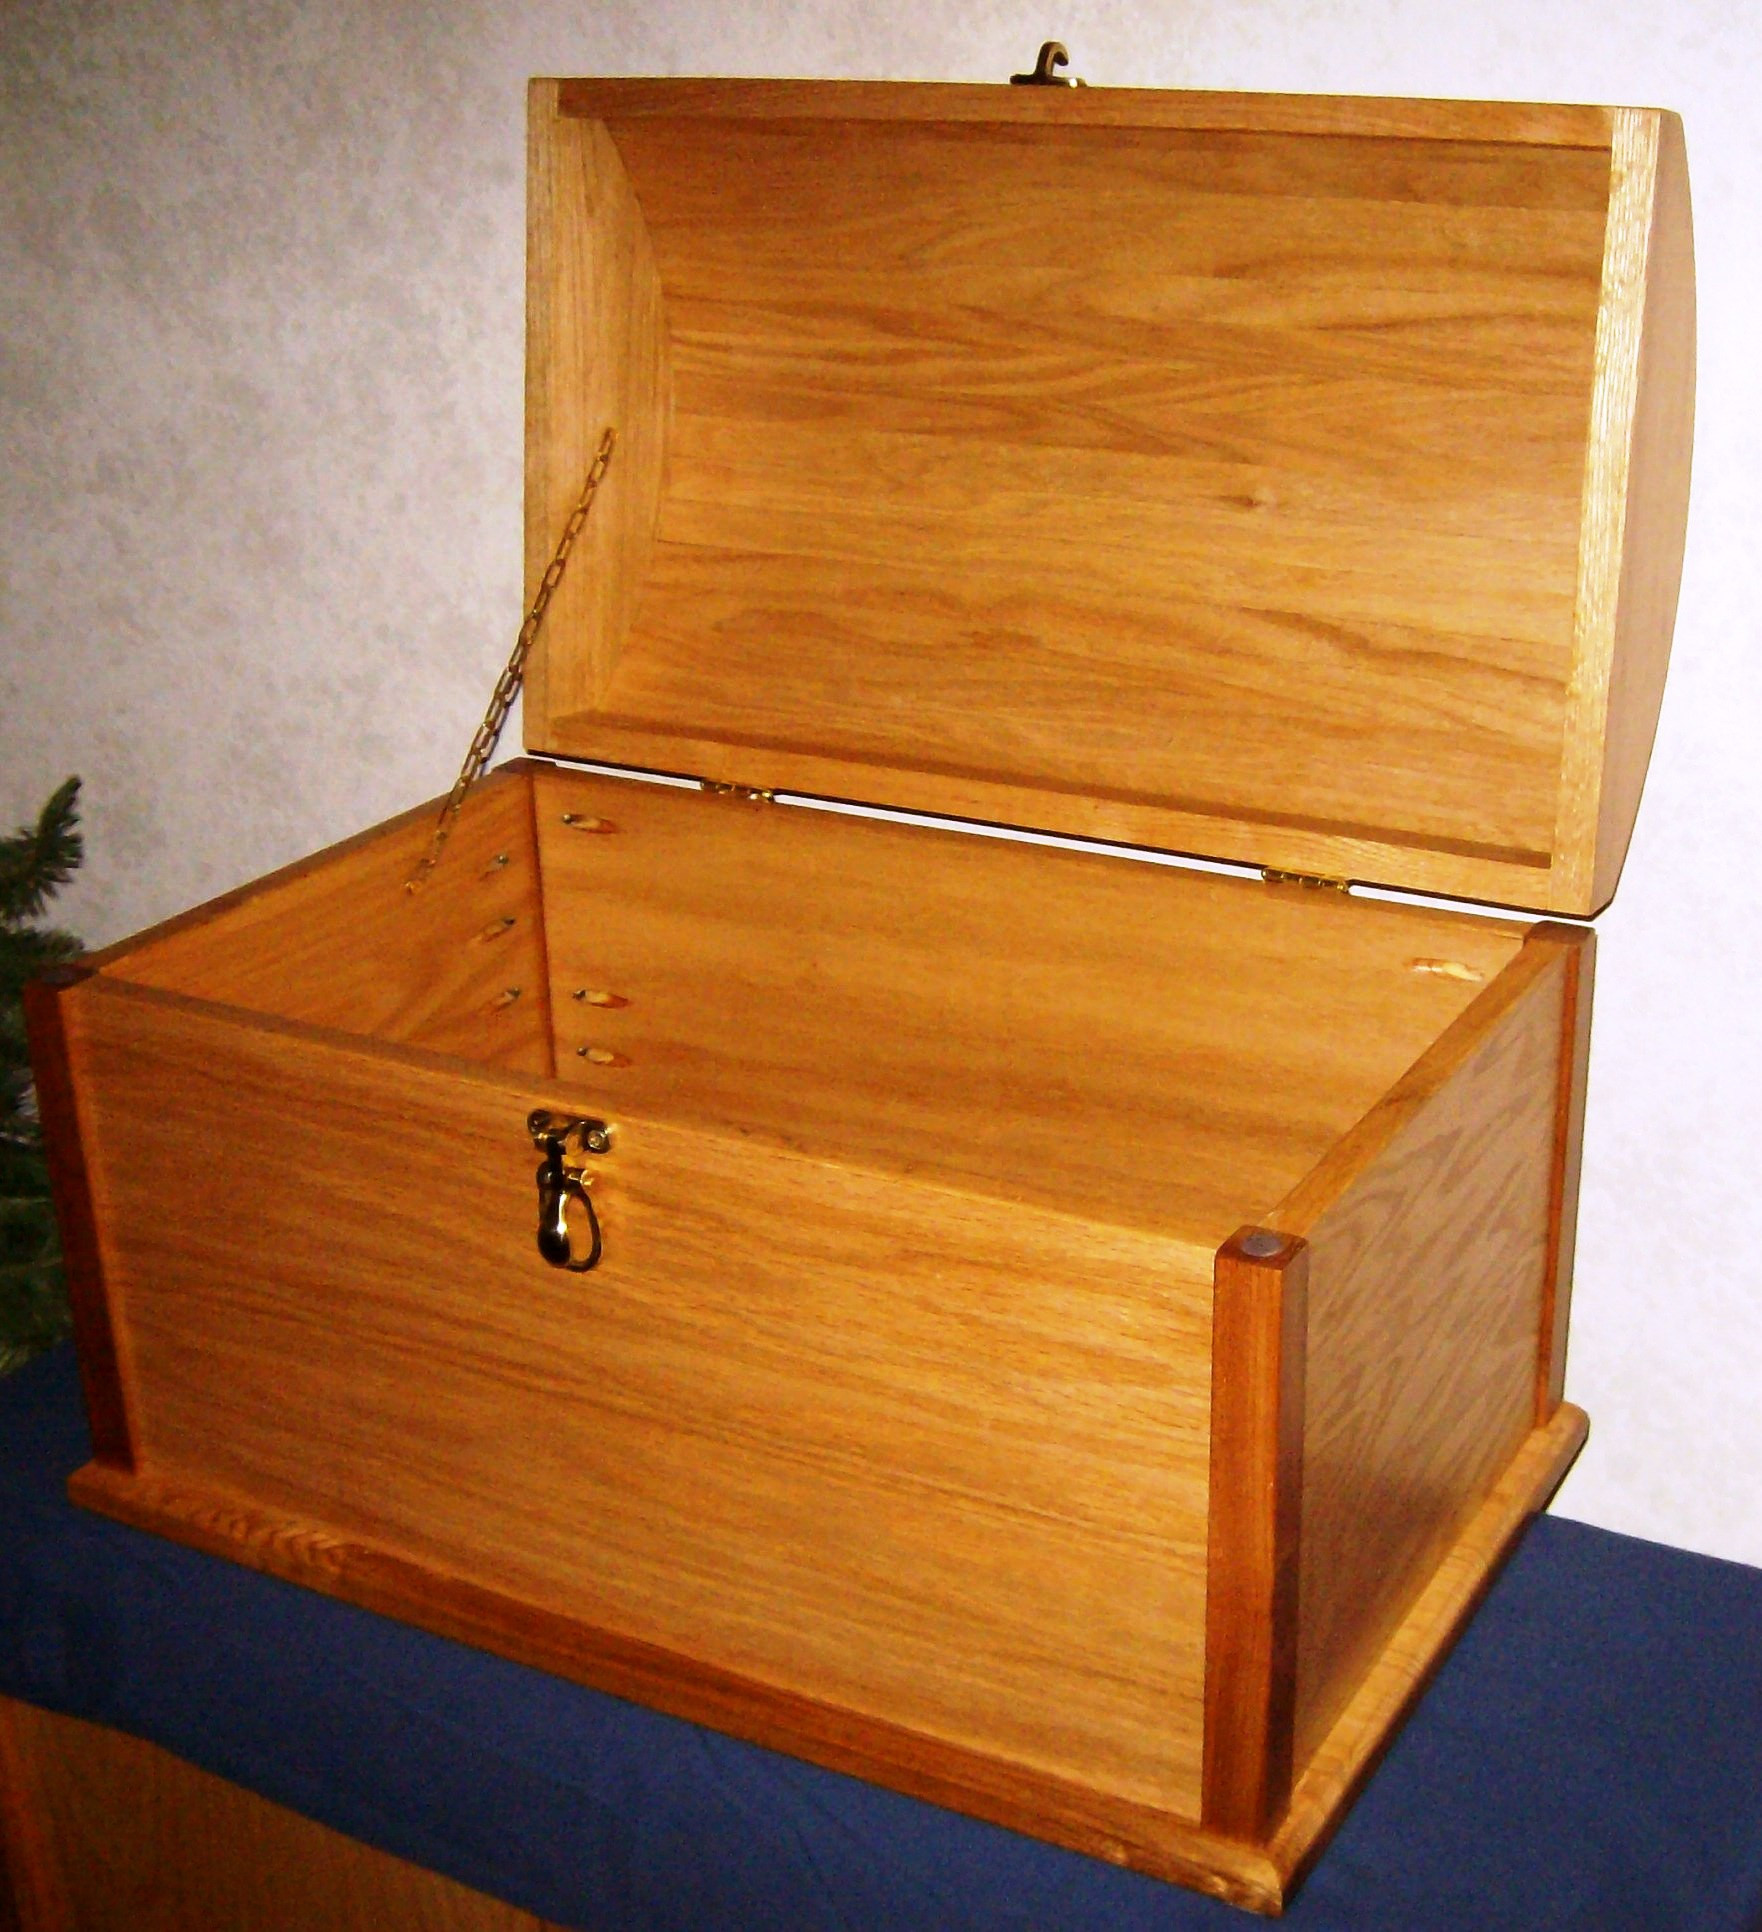 DIY Wood Chest Plans
 PDF How to make a small treasure chest out of wood DIY